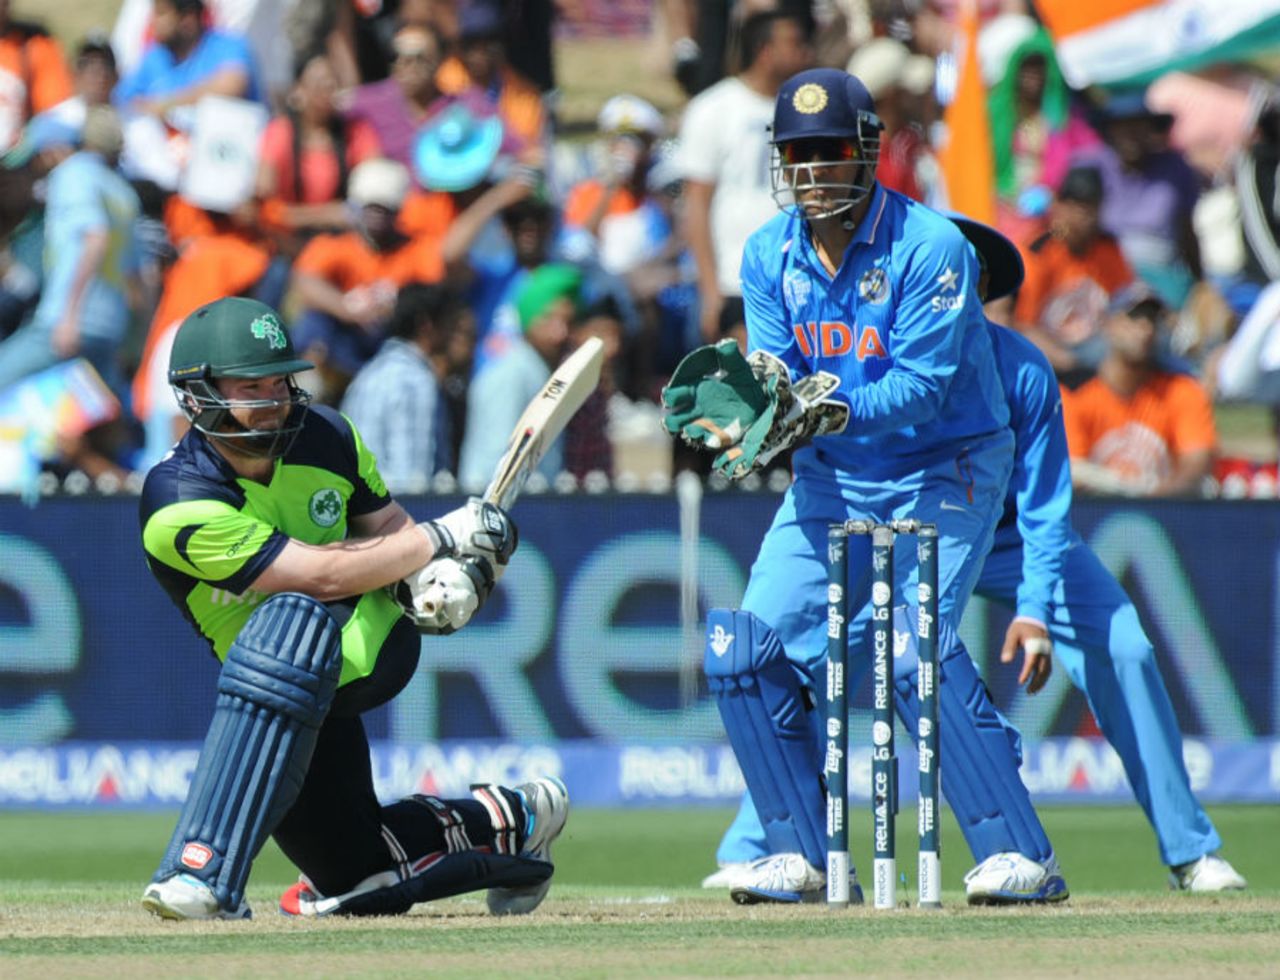 Paul Stirling sweeps the ball, India v Ireland, World Cup 2015, Group B, Hamilton, March 10, 2015